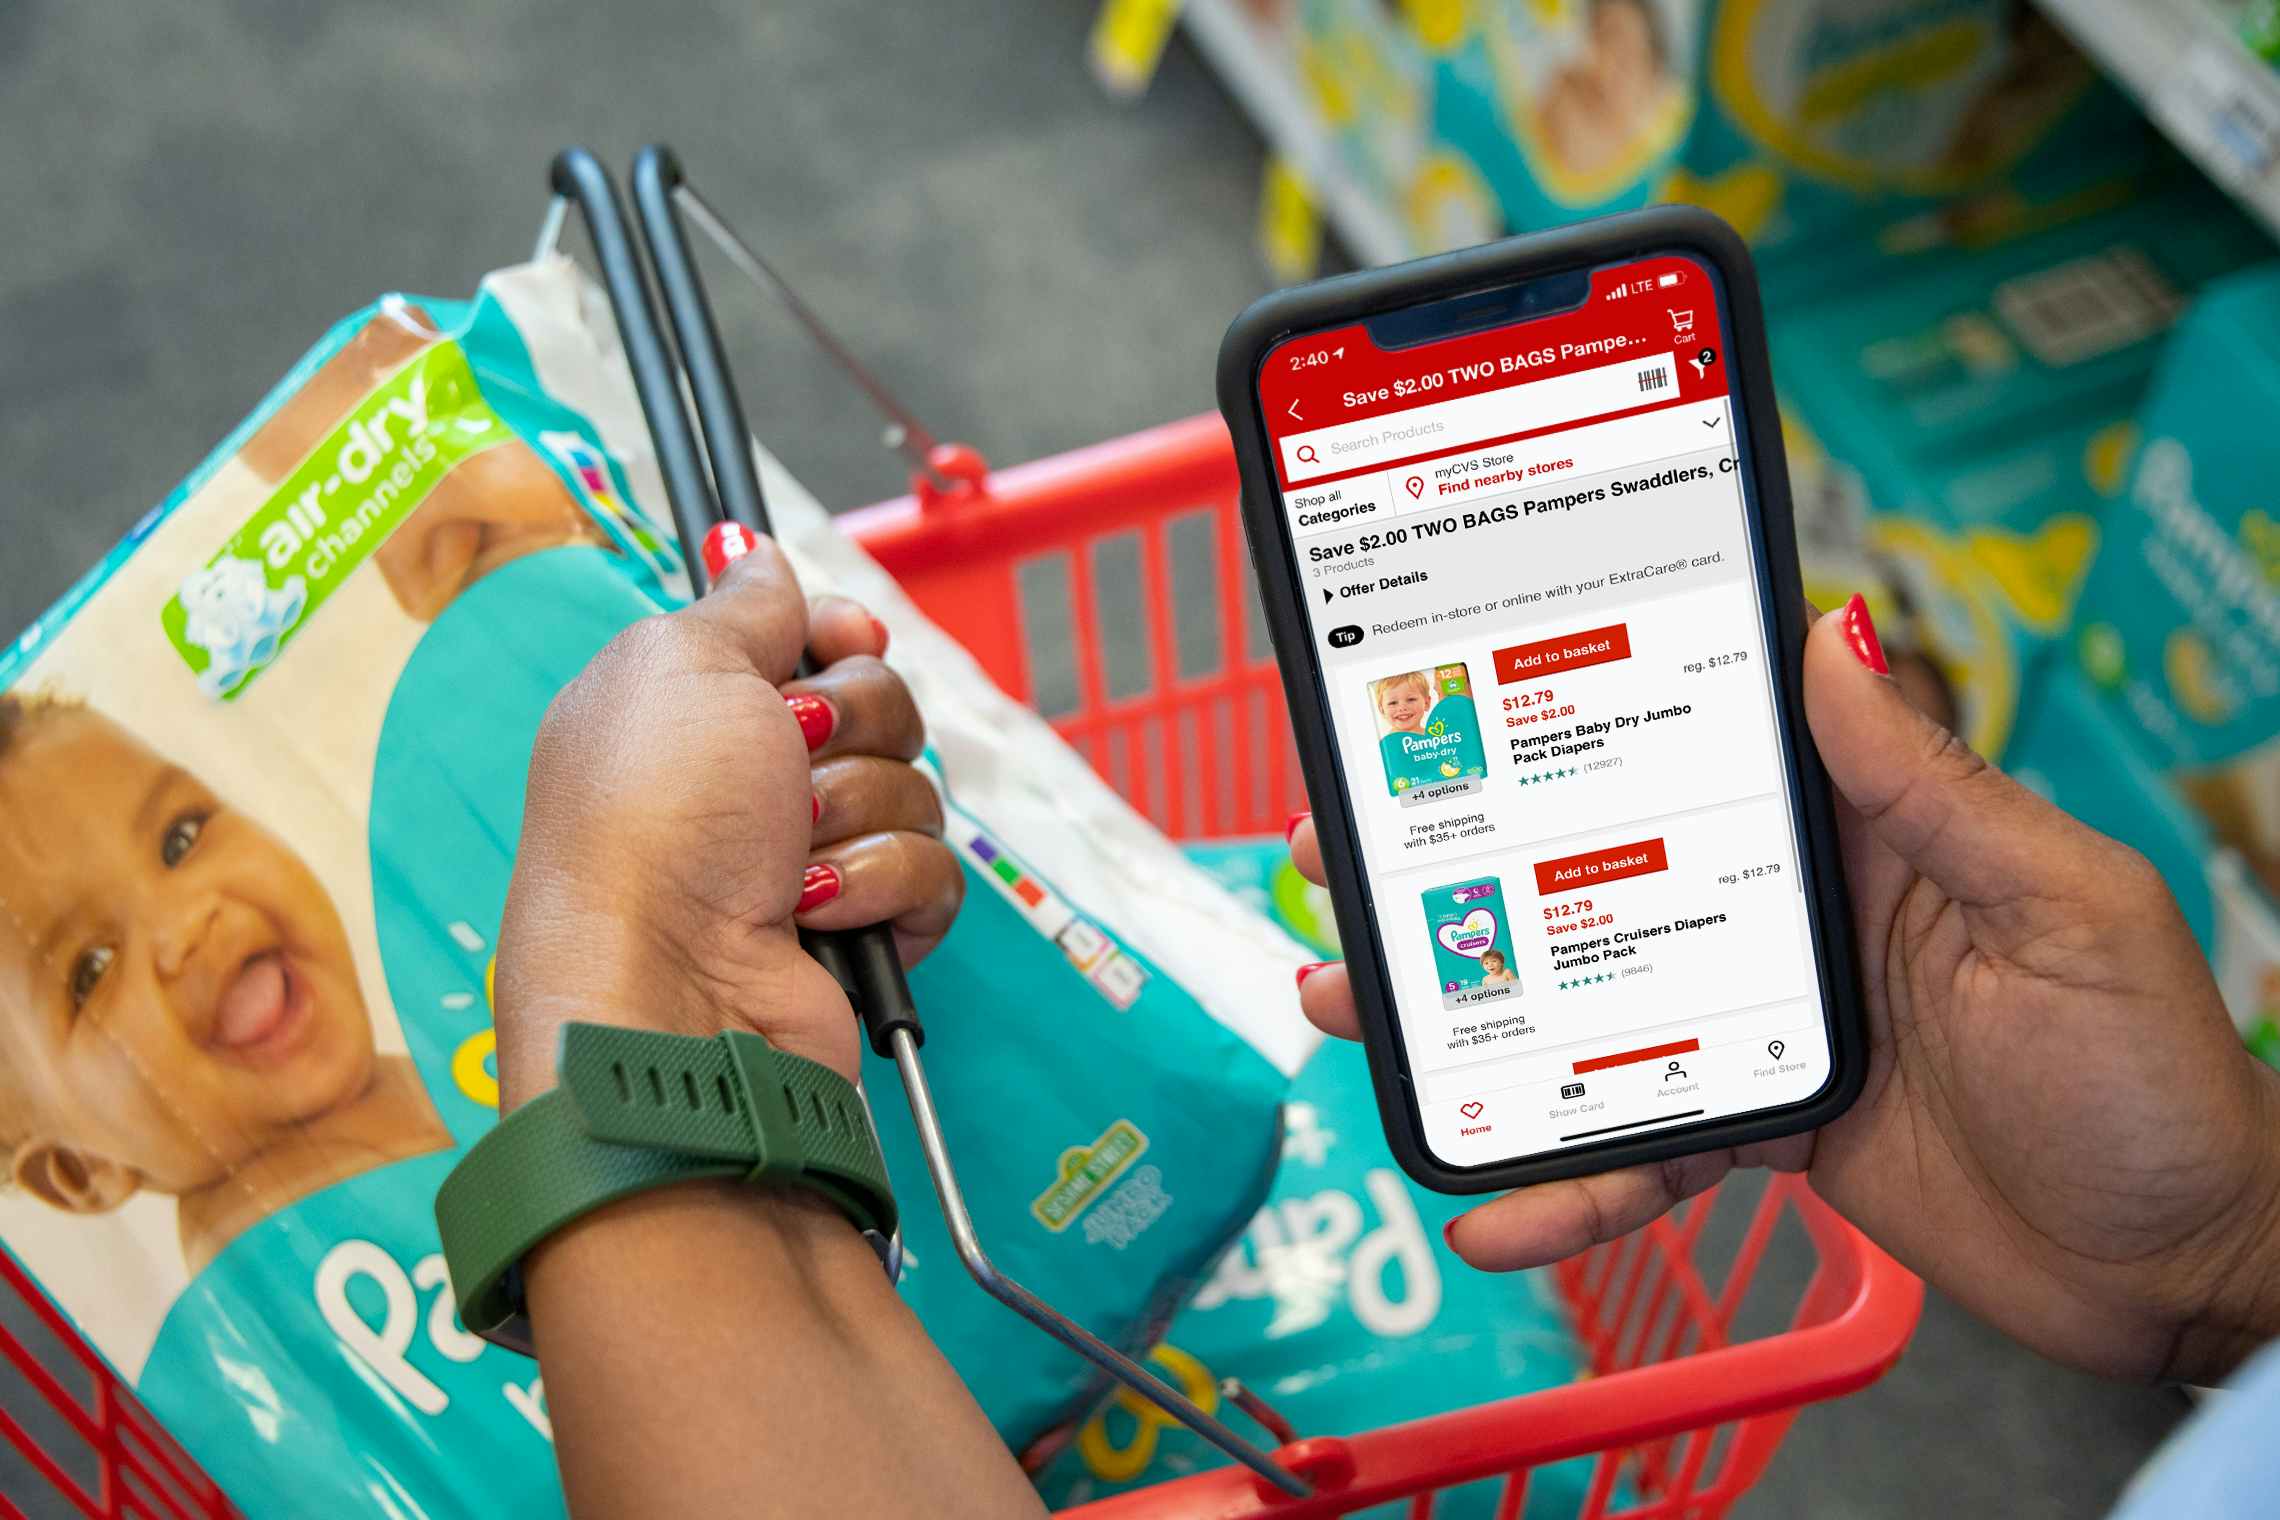 Pampers coupons on the CVS app with a basket holding two packs of pampers diapers.